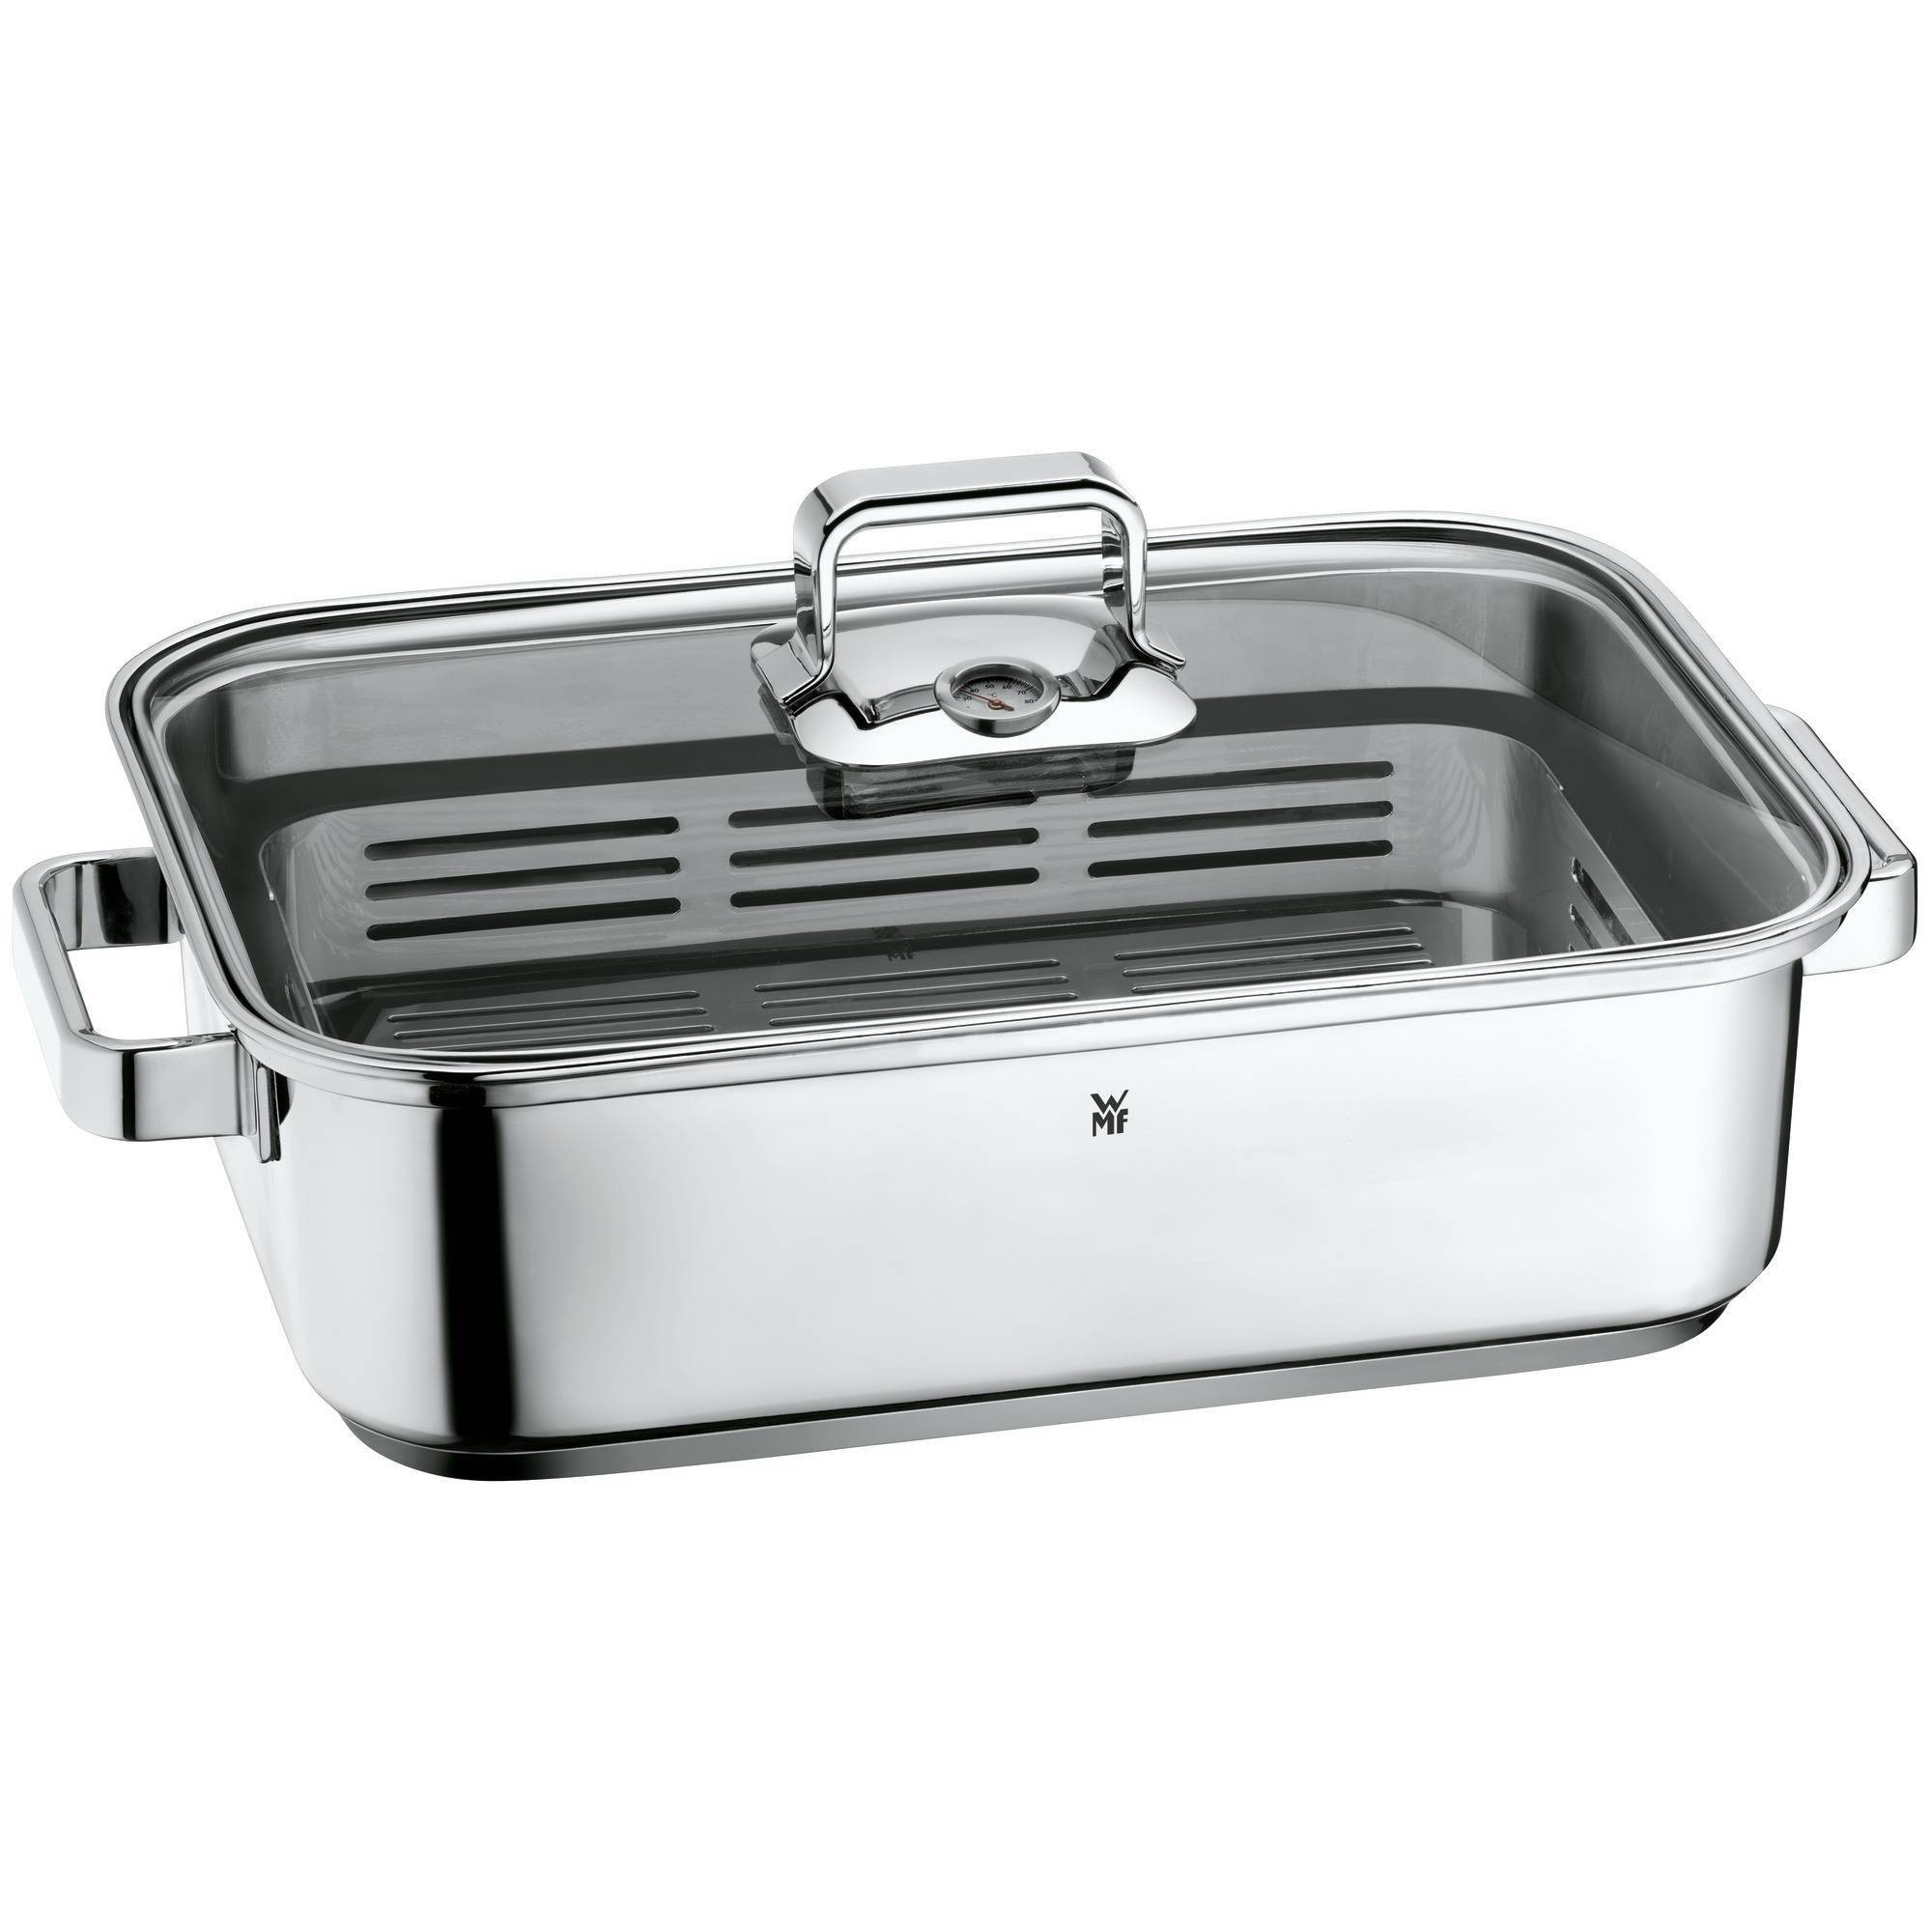 Stainless steel roasting pan with lid